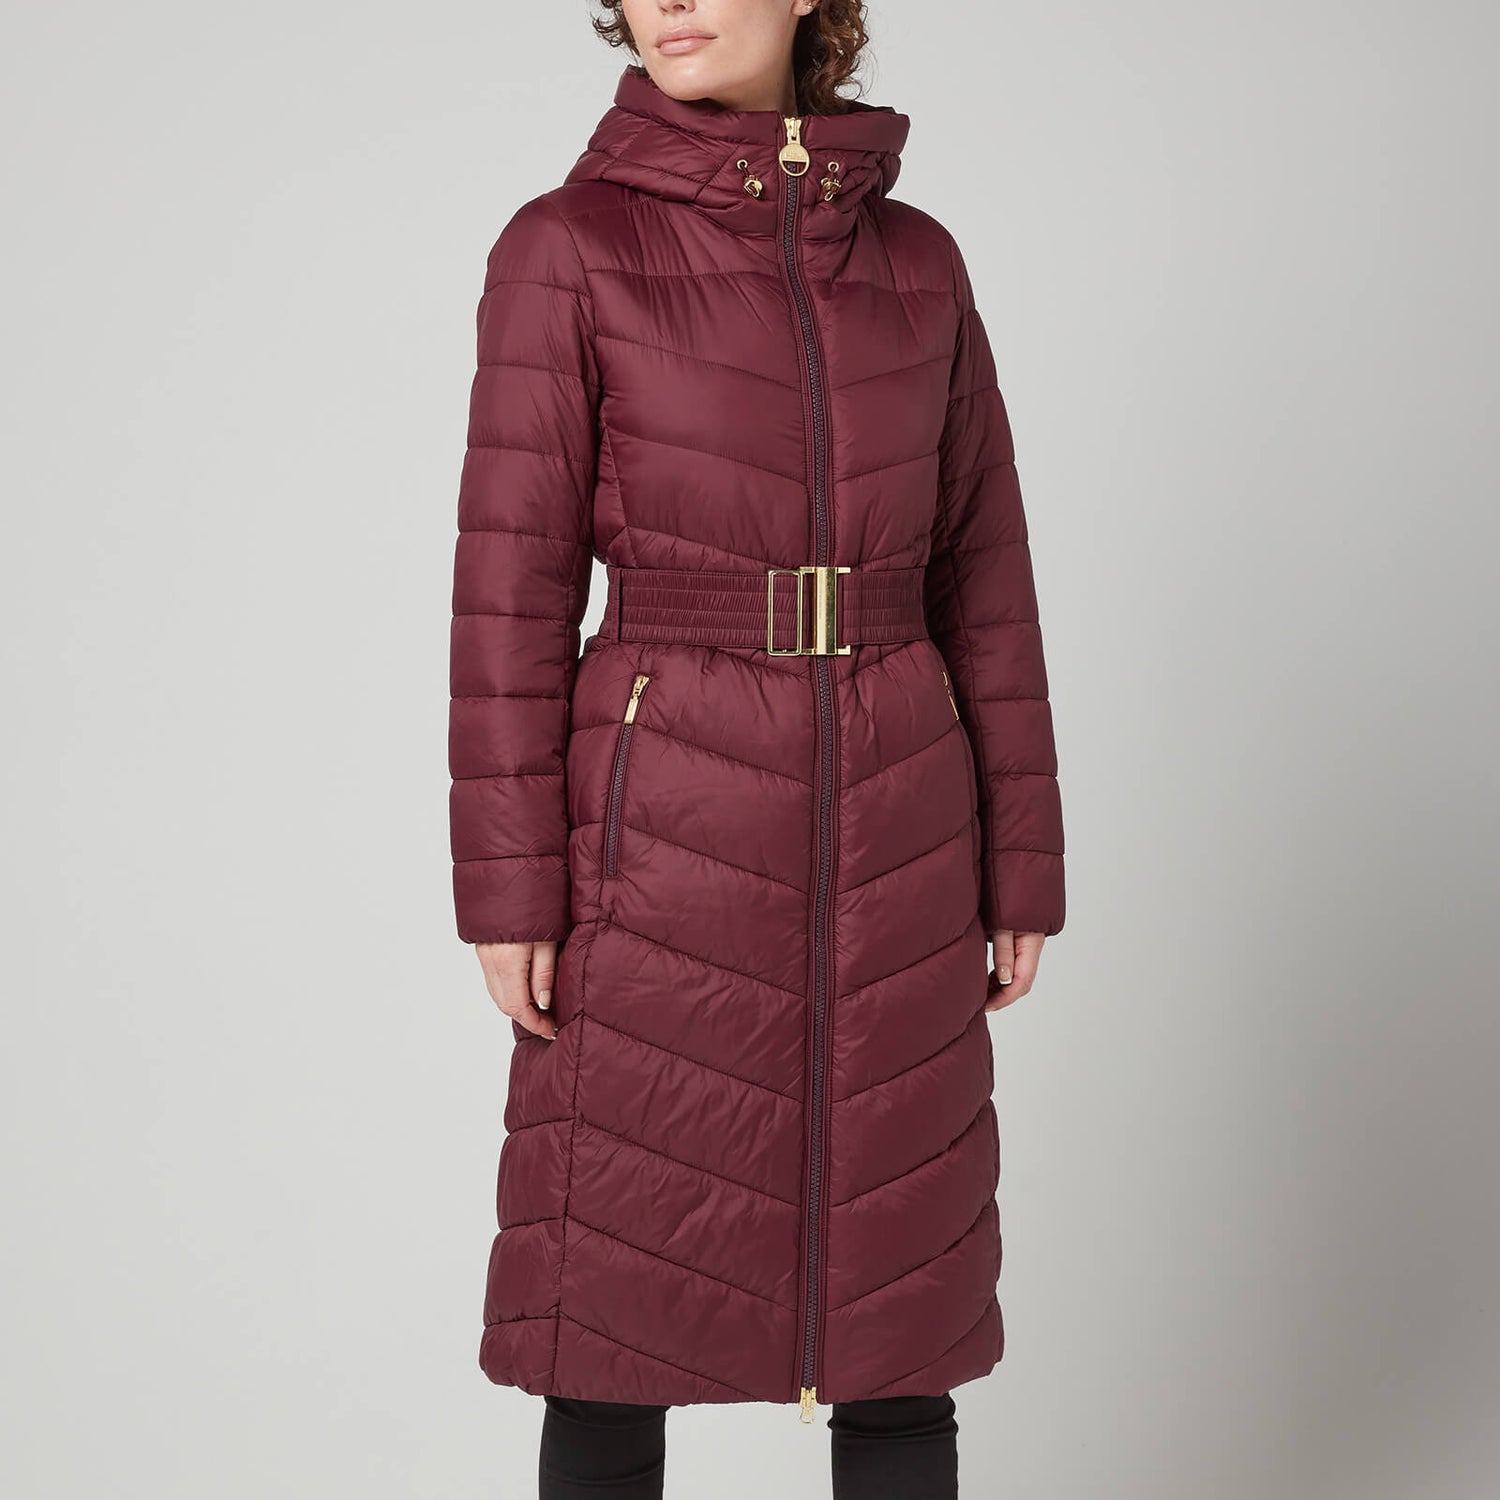 Barbour International Women's Lineout Quilted Jacket - Merlot